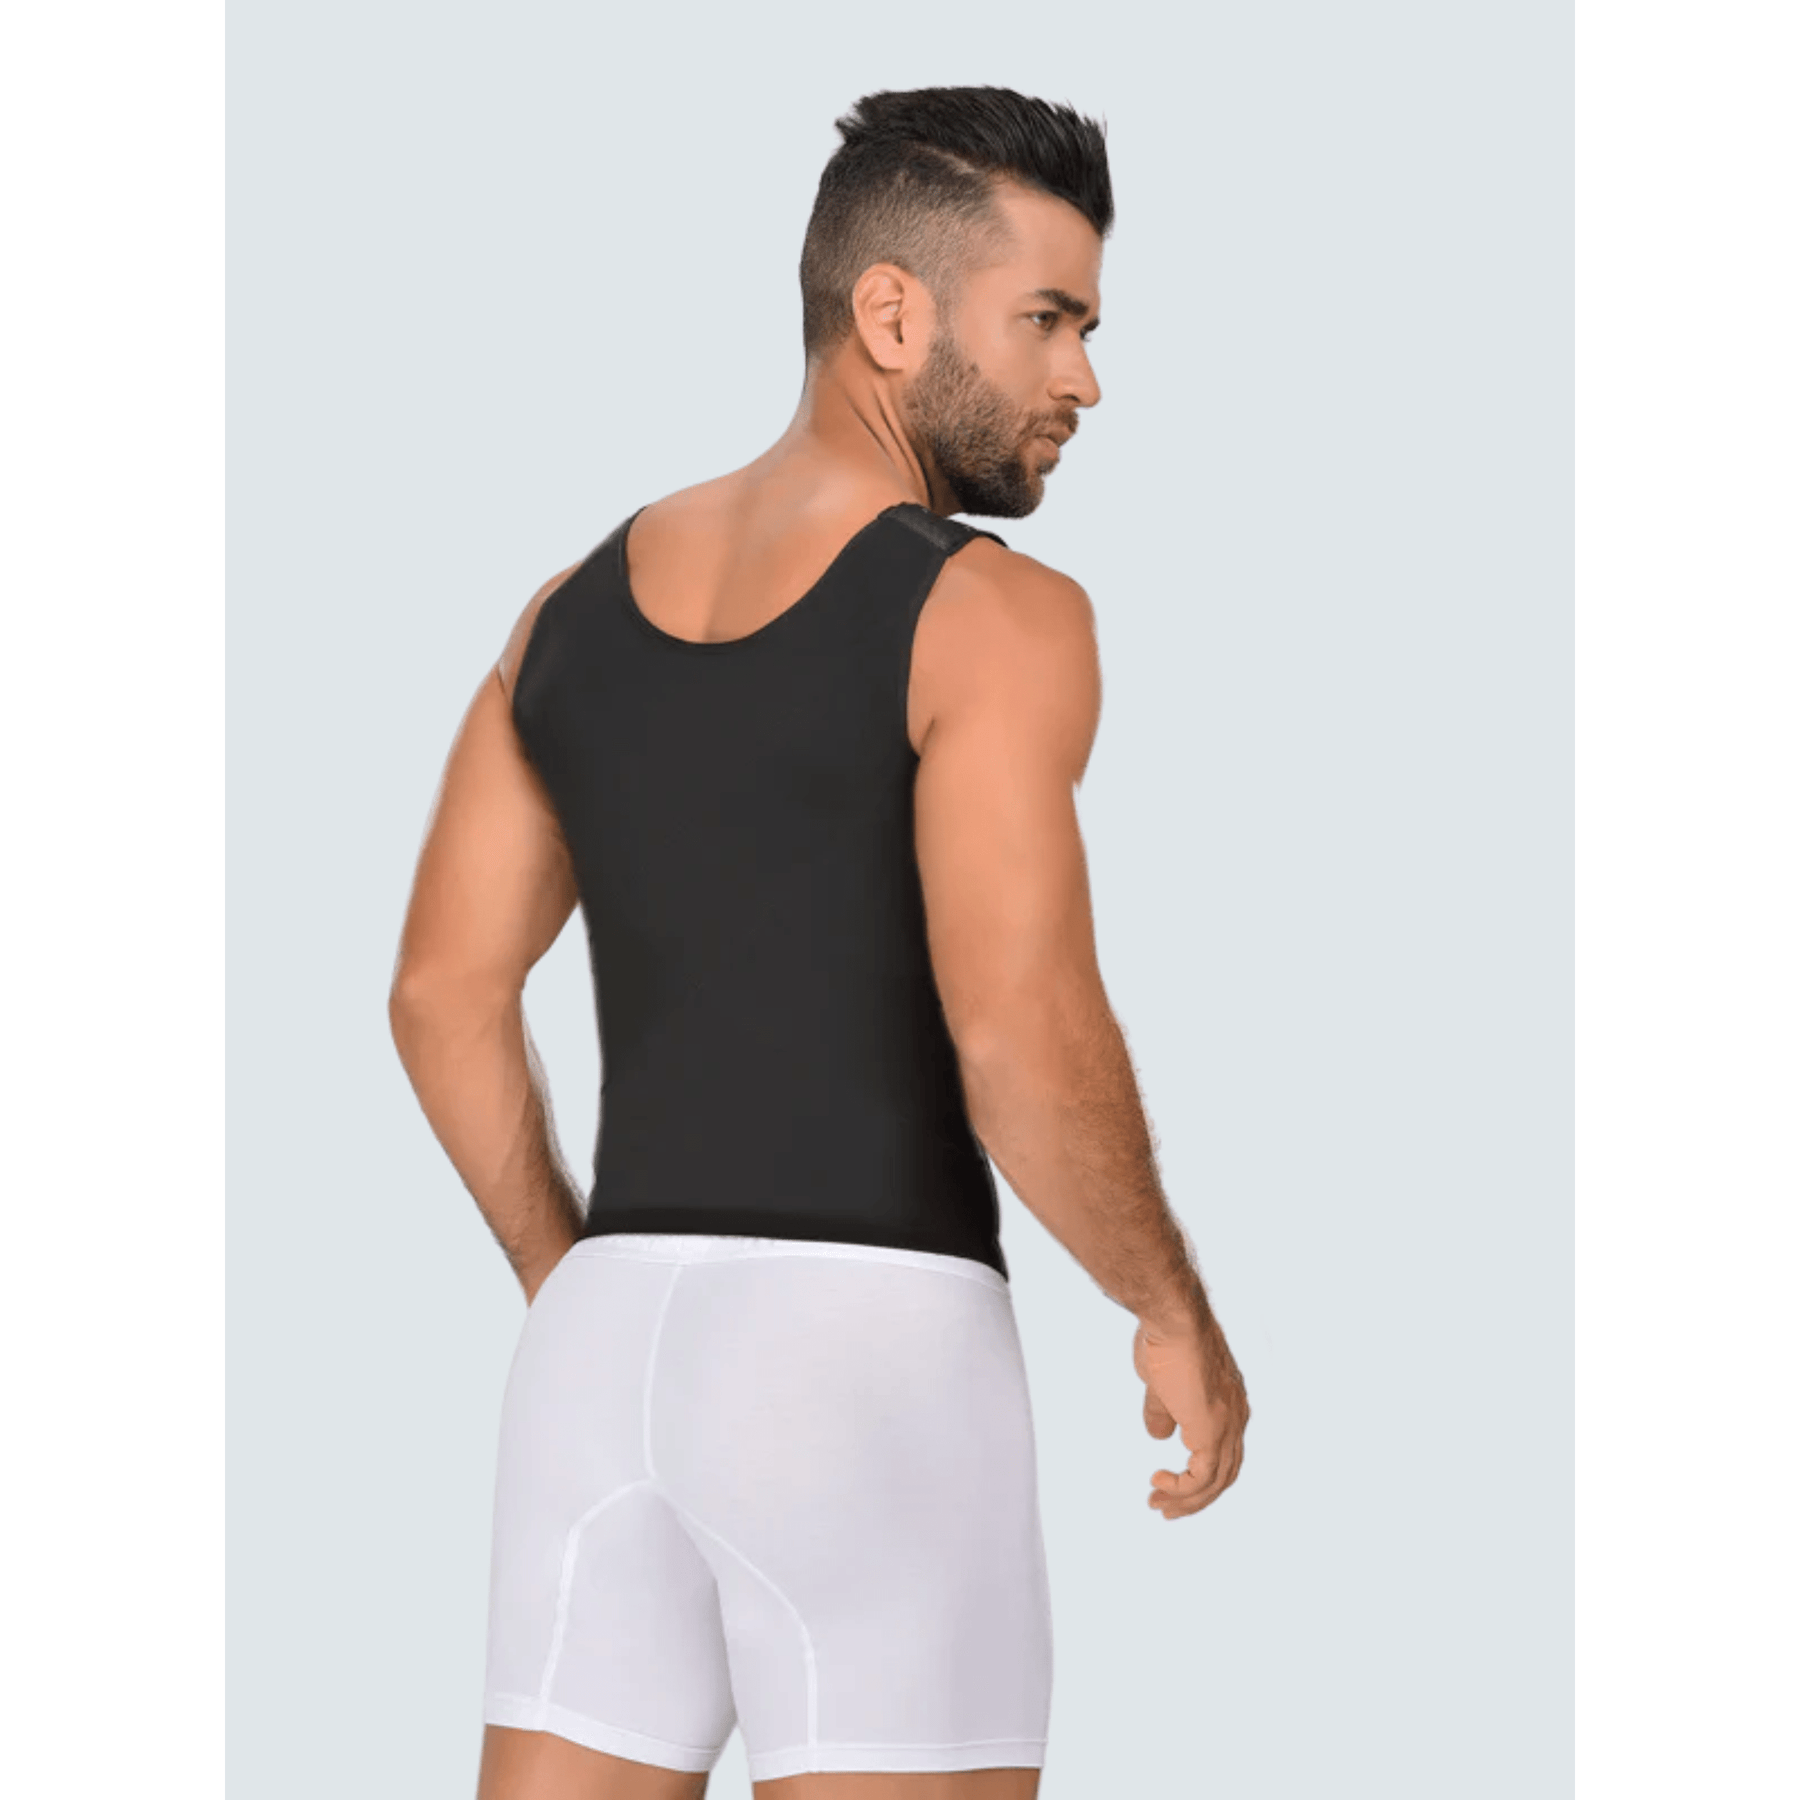 CH0060 - VEST WITH BODY POSTURE CORRECTOR